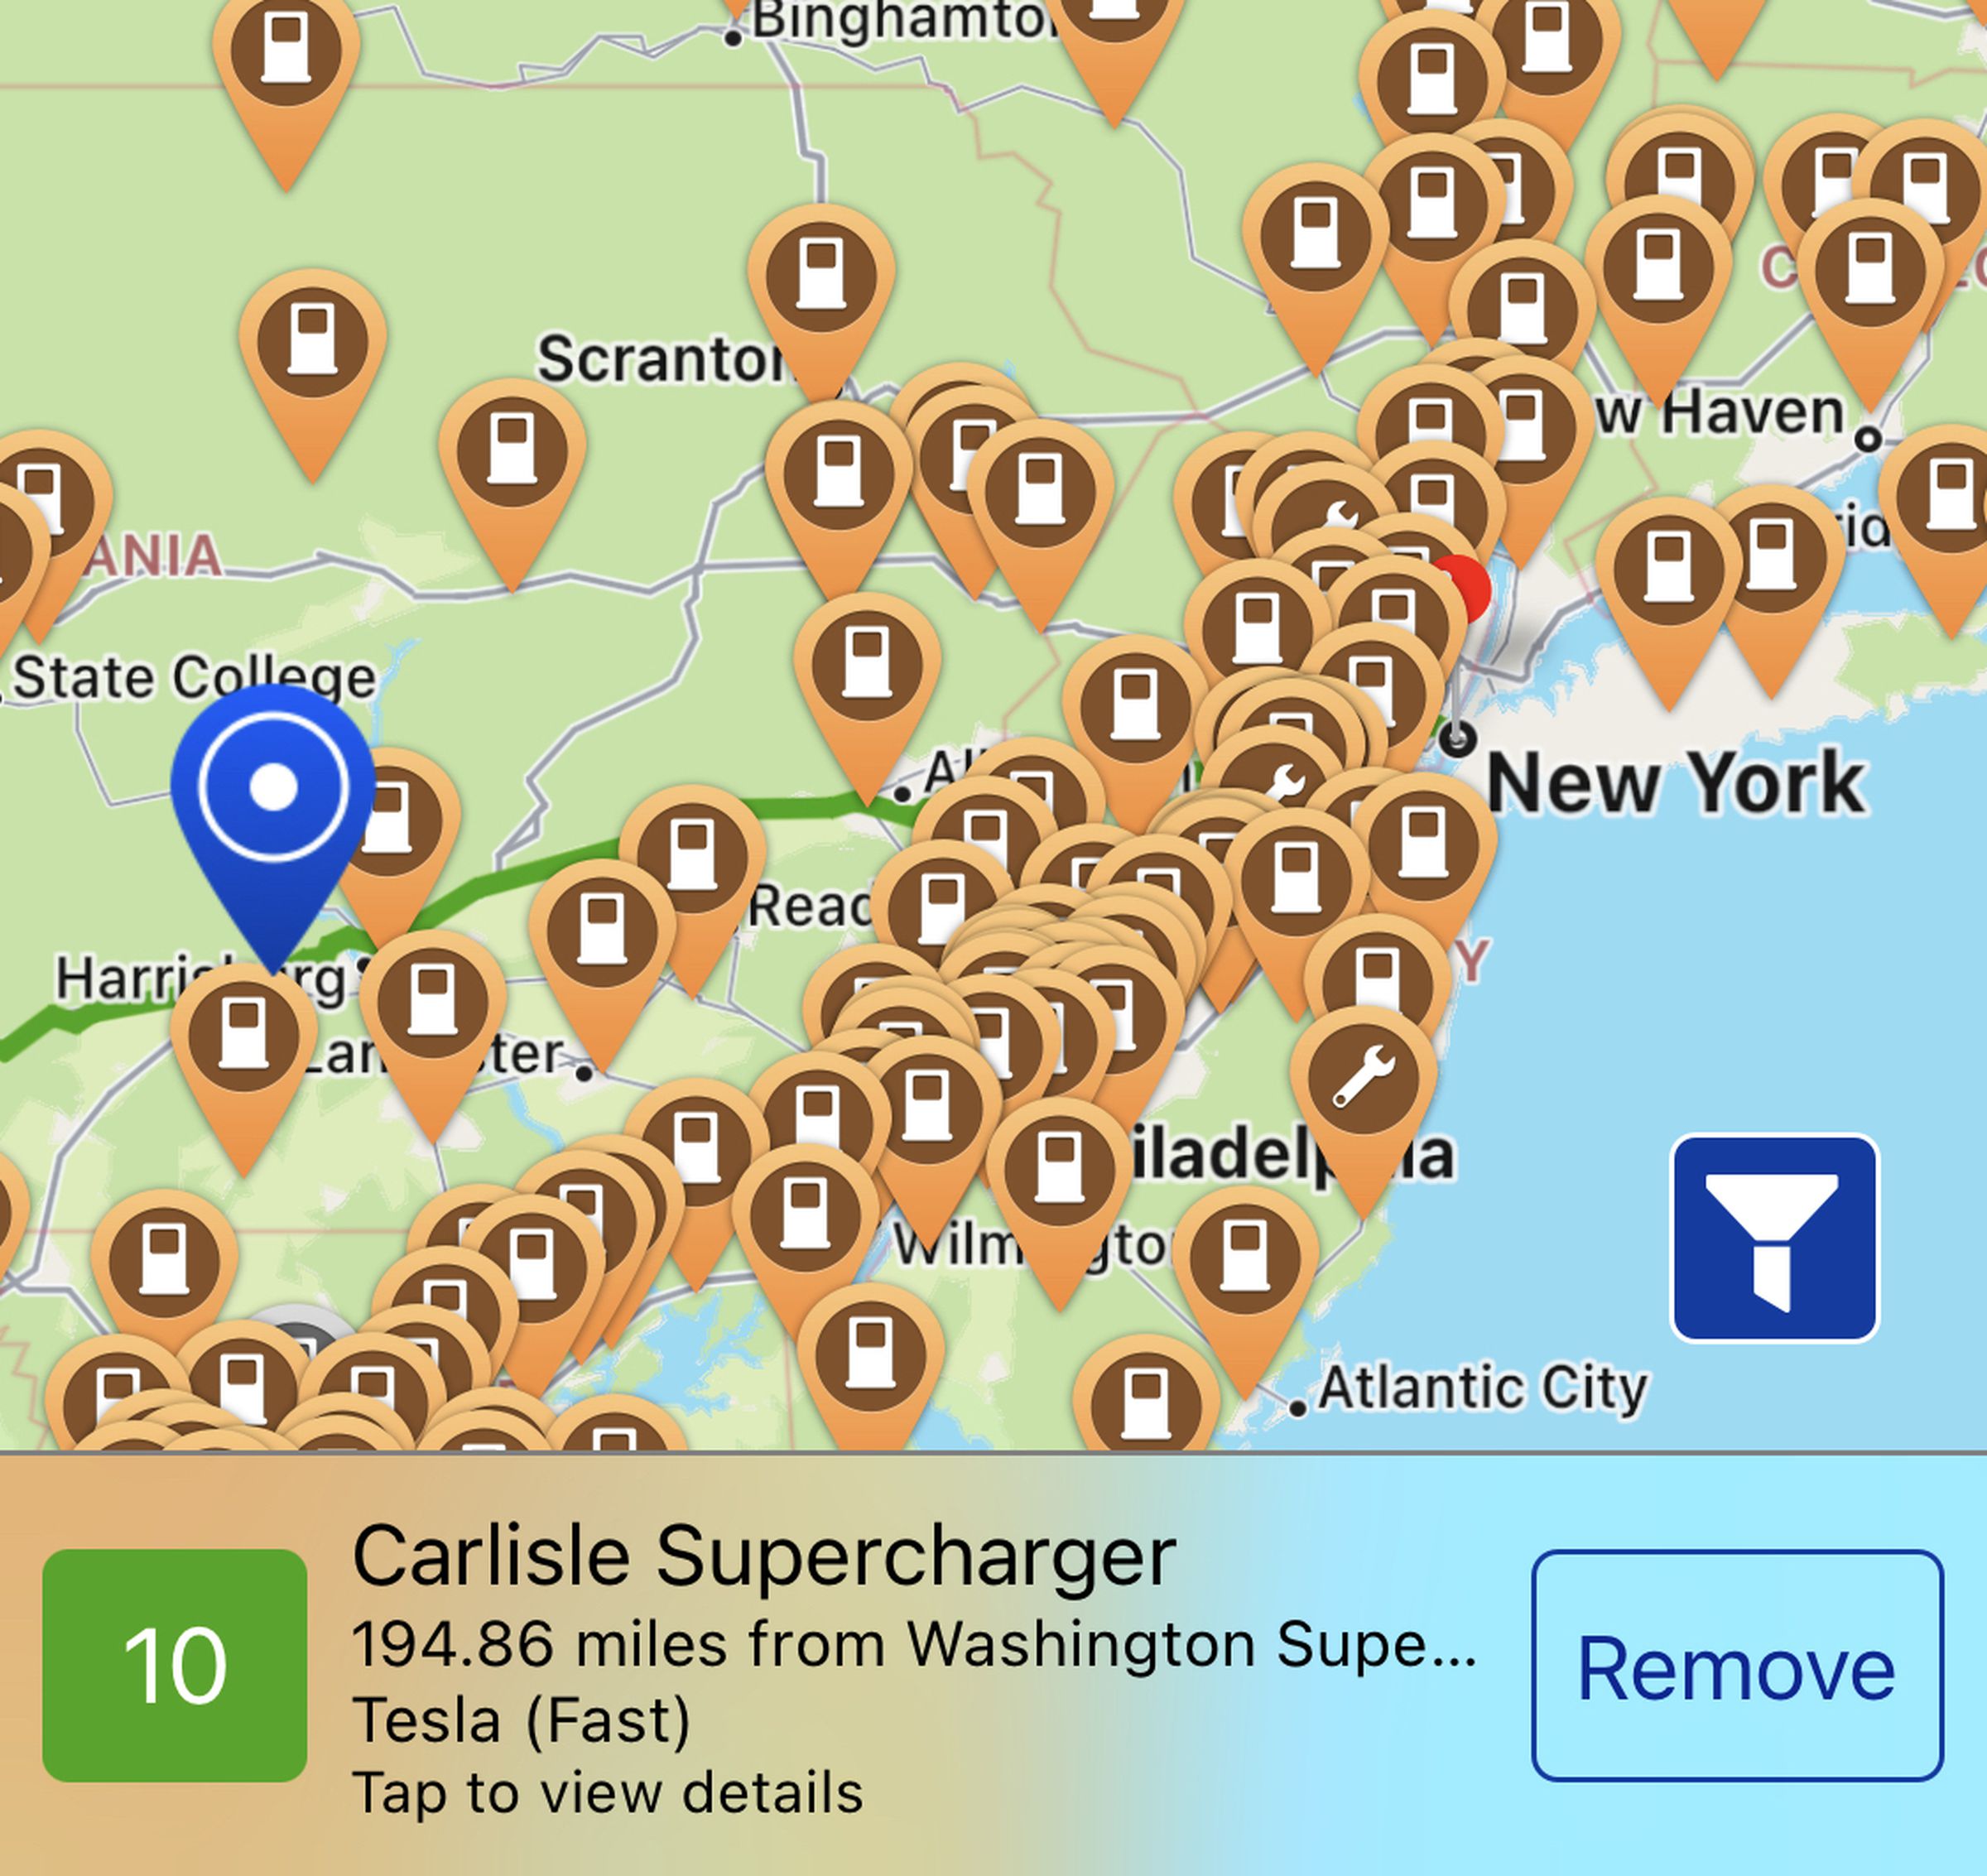 PlugShare app route comparing the well-covered I-95 corridor to the ~200-mile stretch on routes 81 and 78 heading towards NYC from western PA.